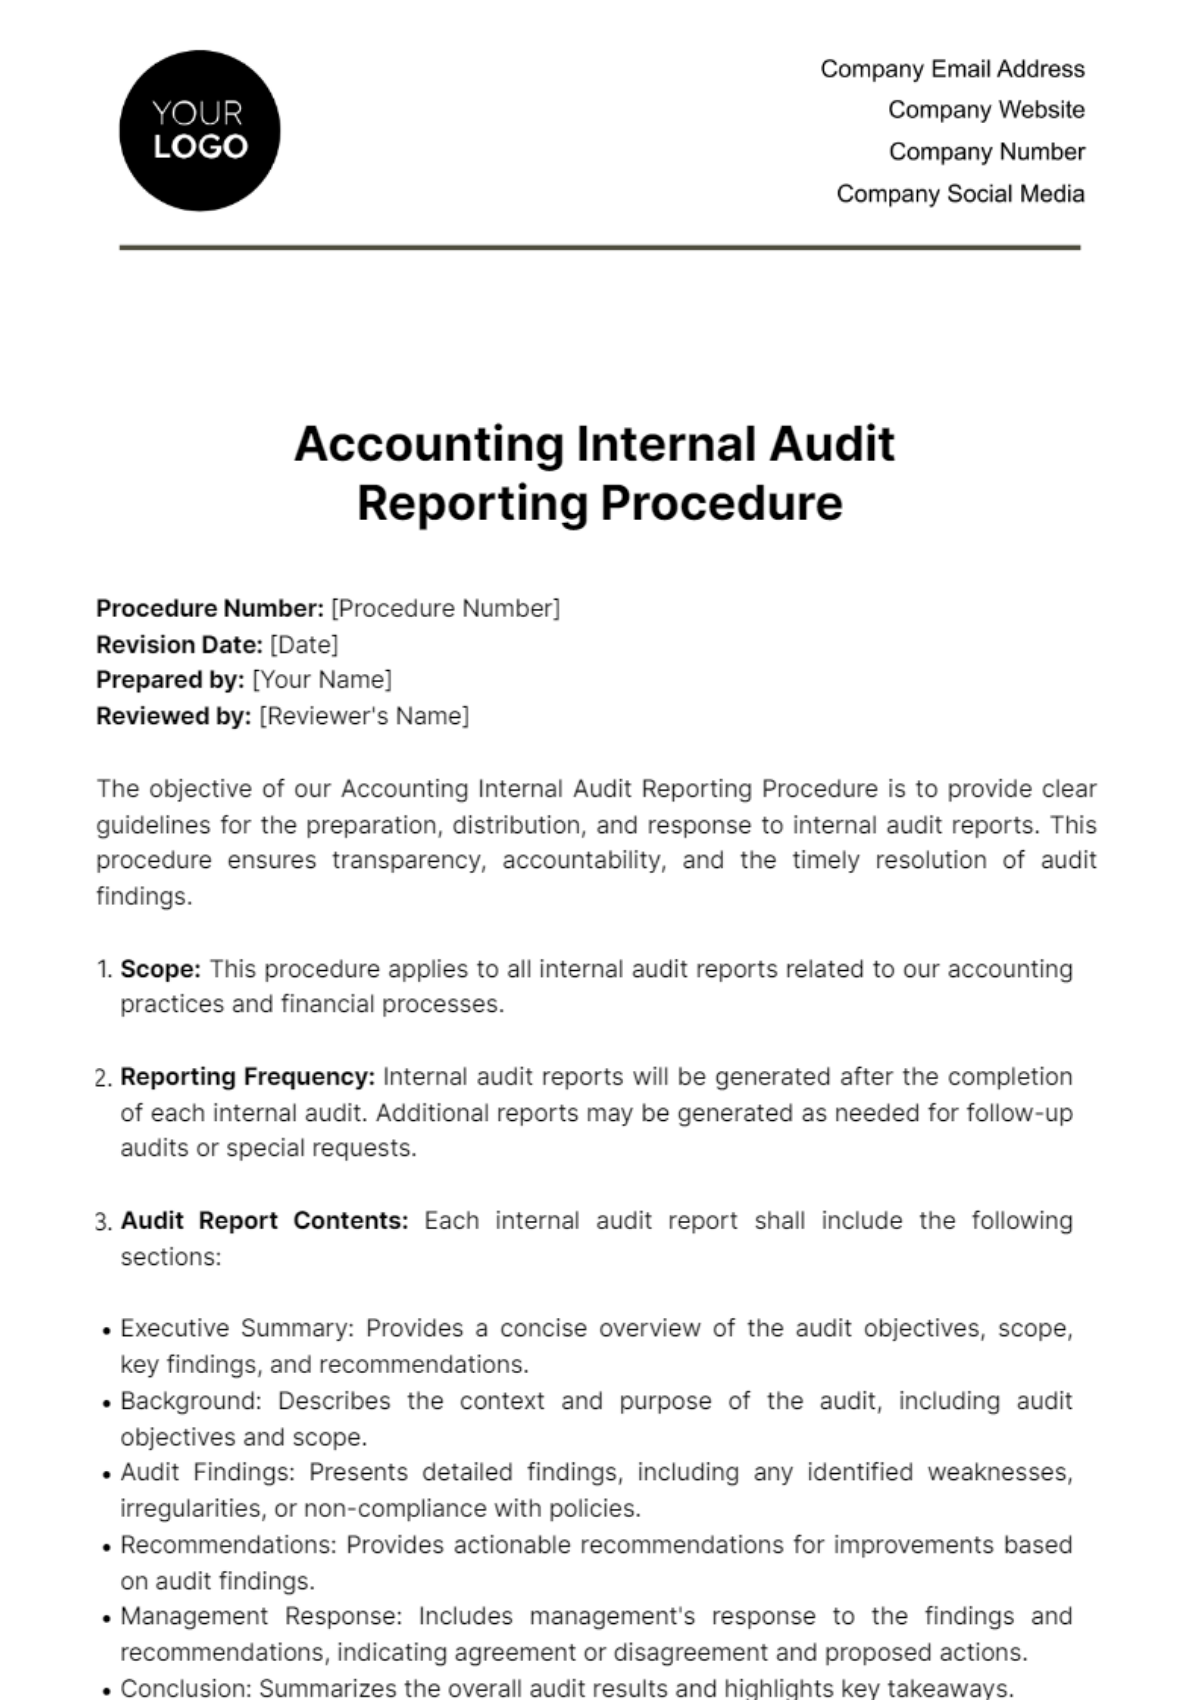 Accounting Internal Audit Reporting Procedure Template